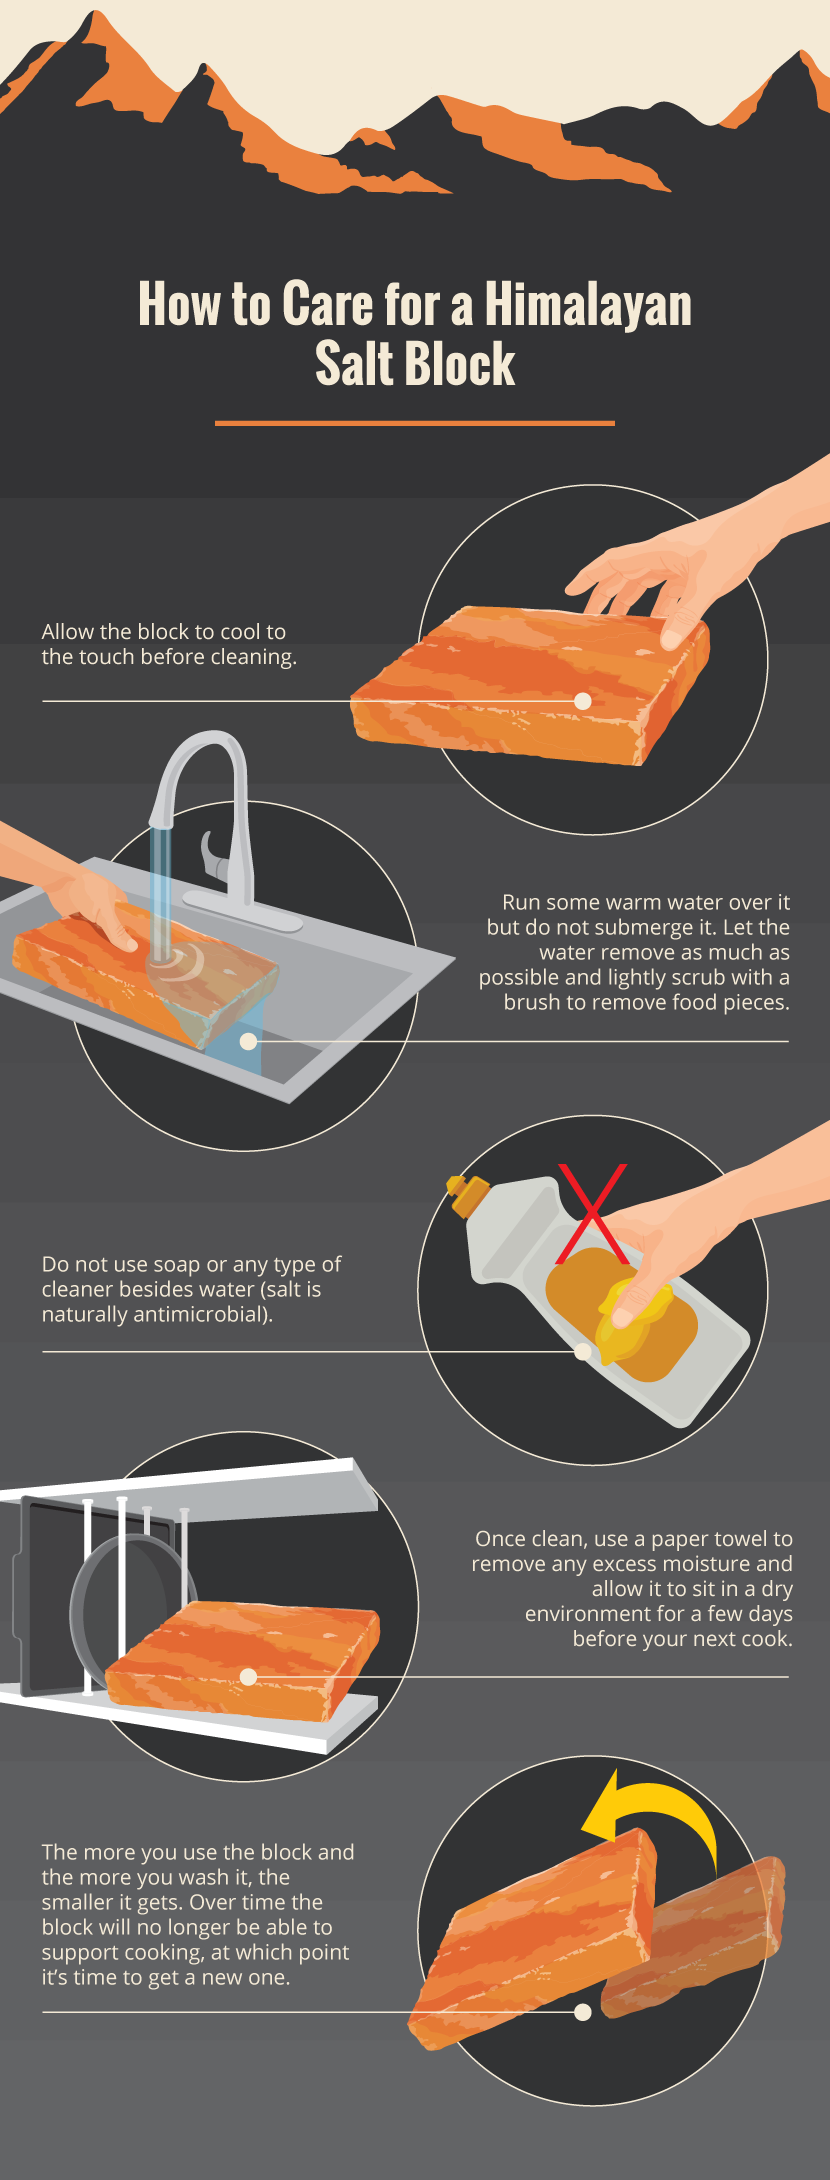 Caring For a Himalayan Salt Block - Grilling on a Himalayan Salt Block